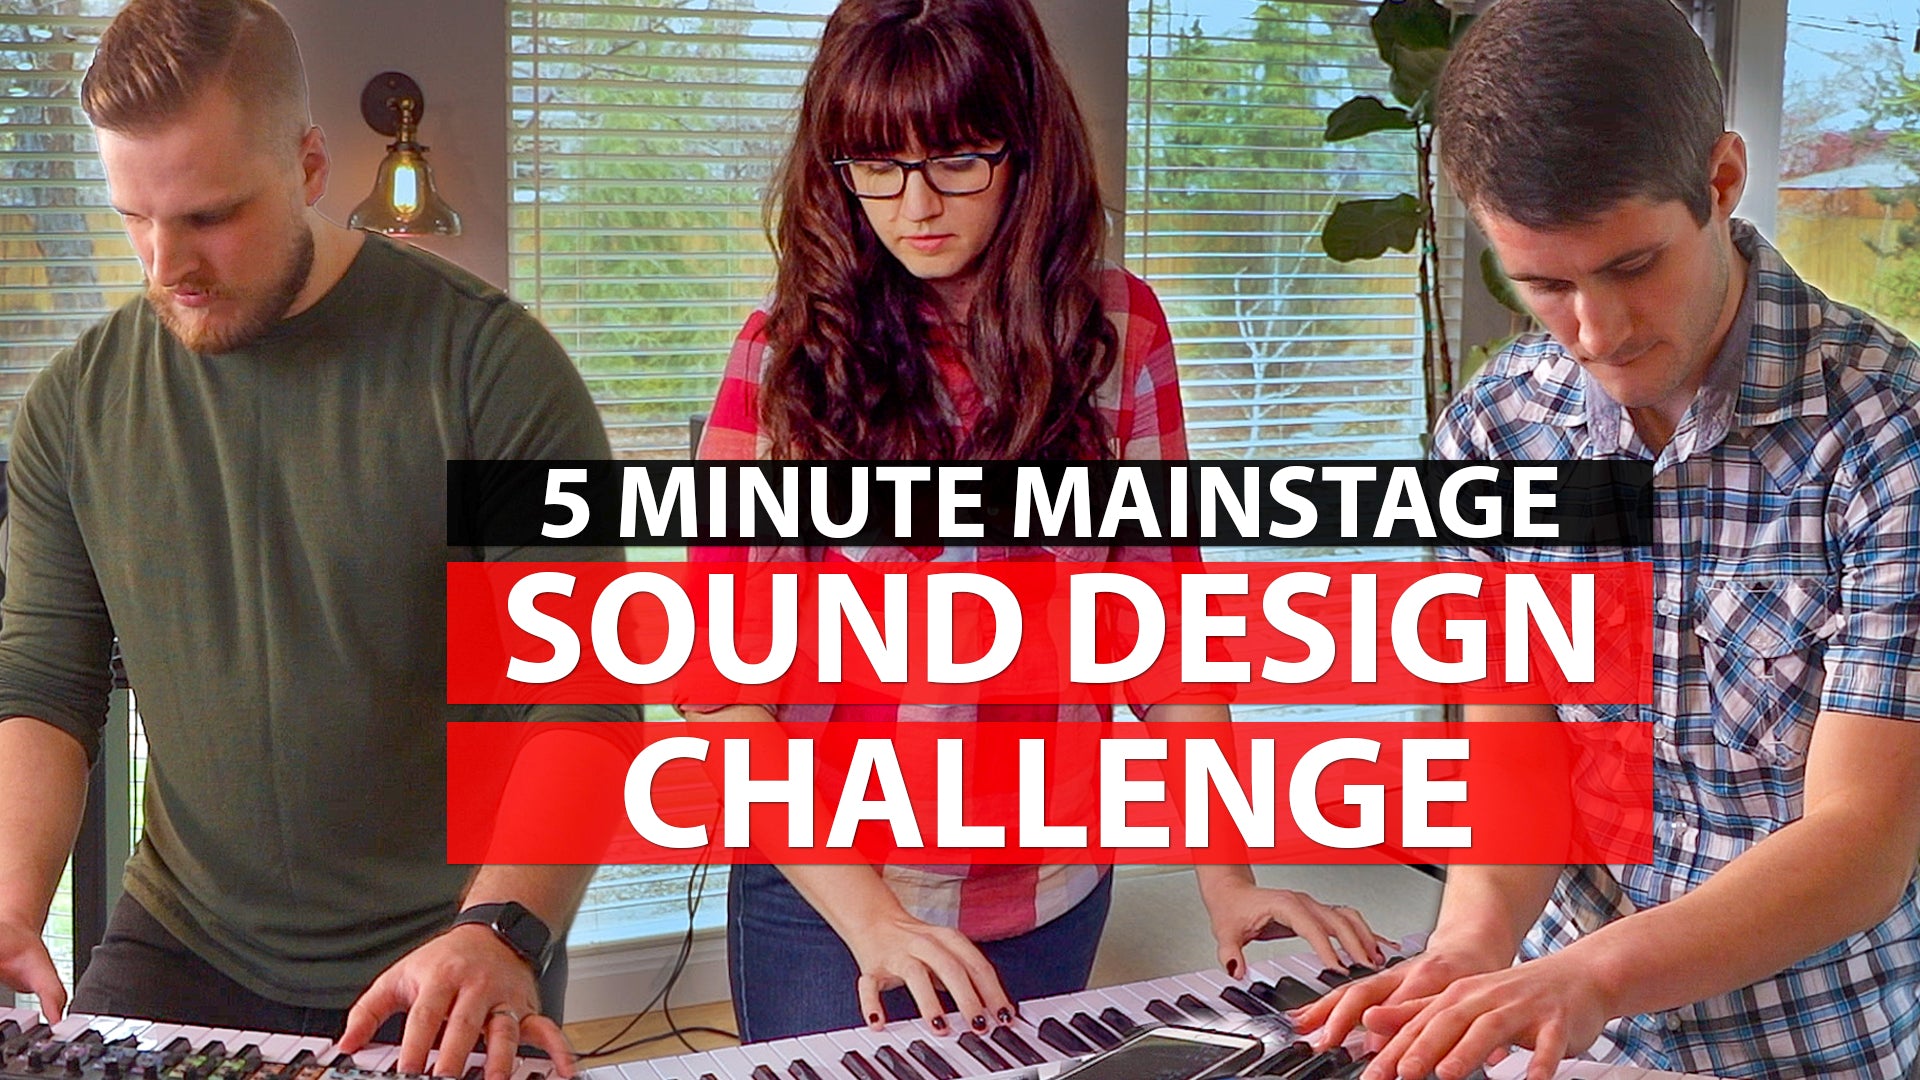 Create a MainStage Worship Patch in 5 Minutes Challenge - Sunday Sounds